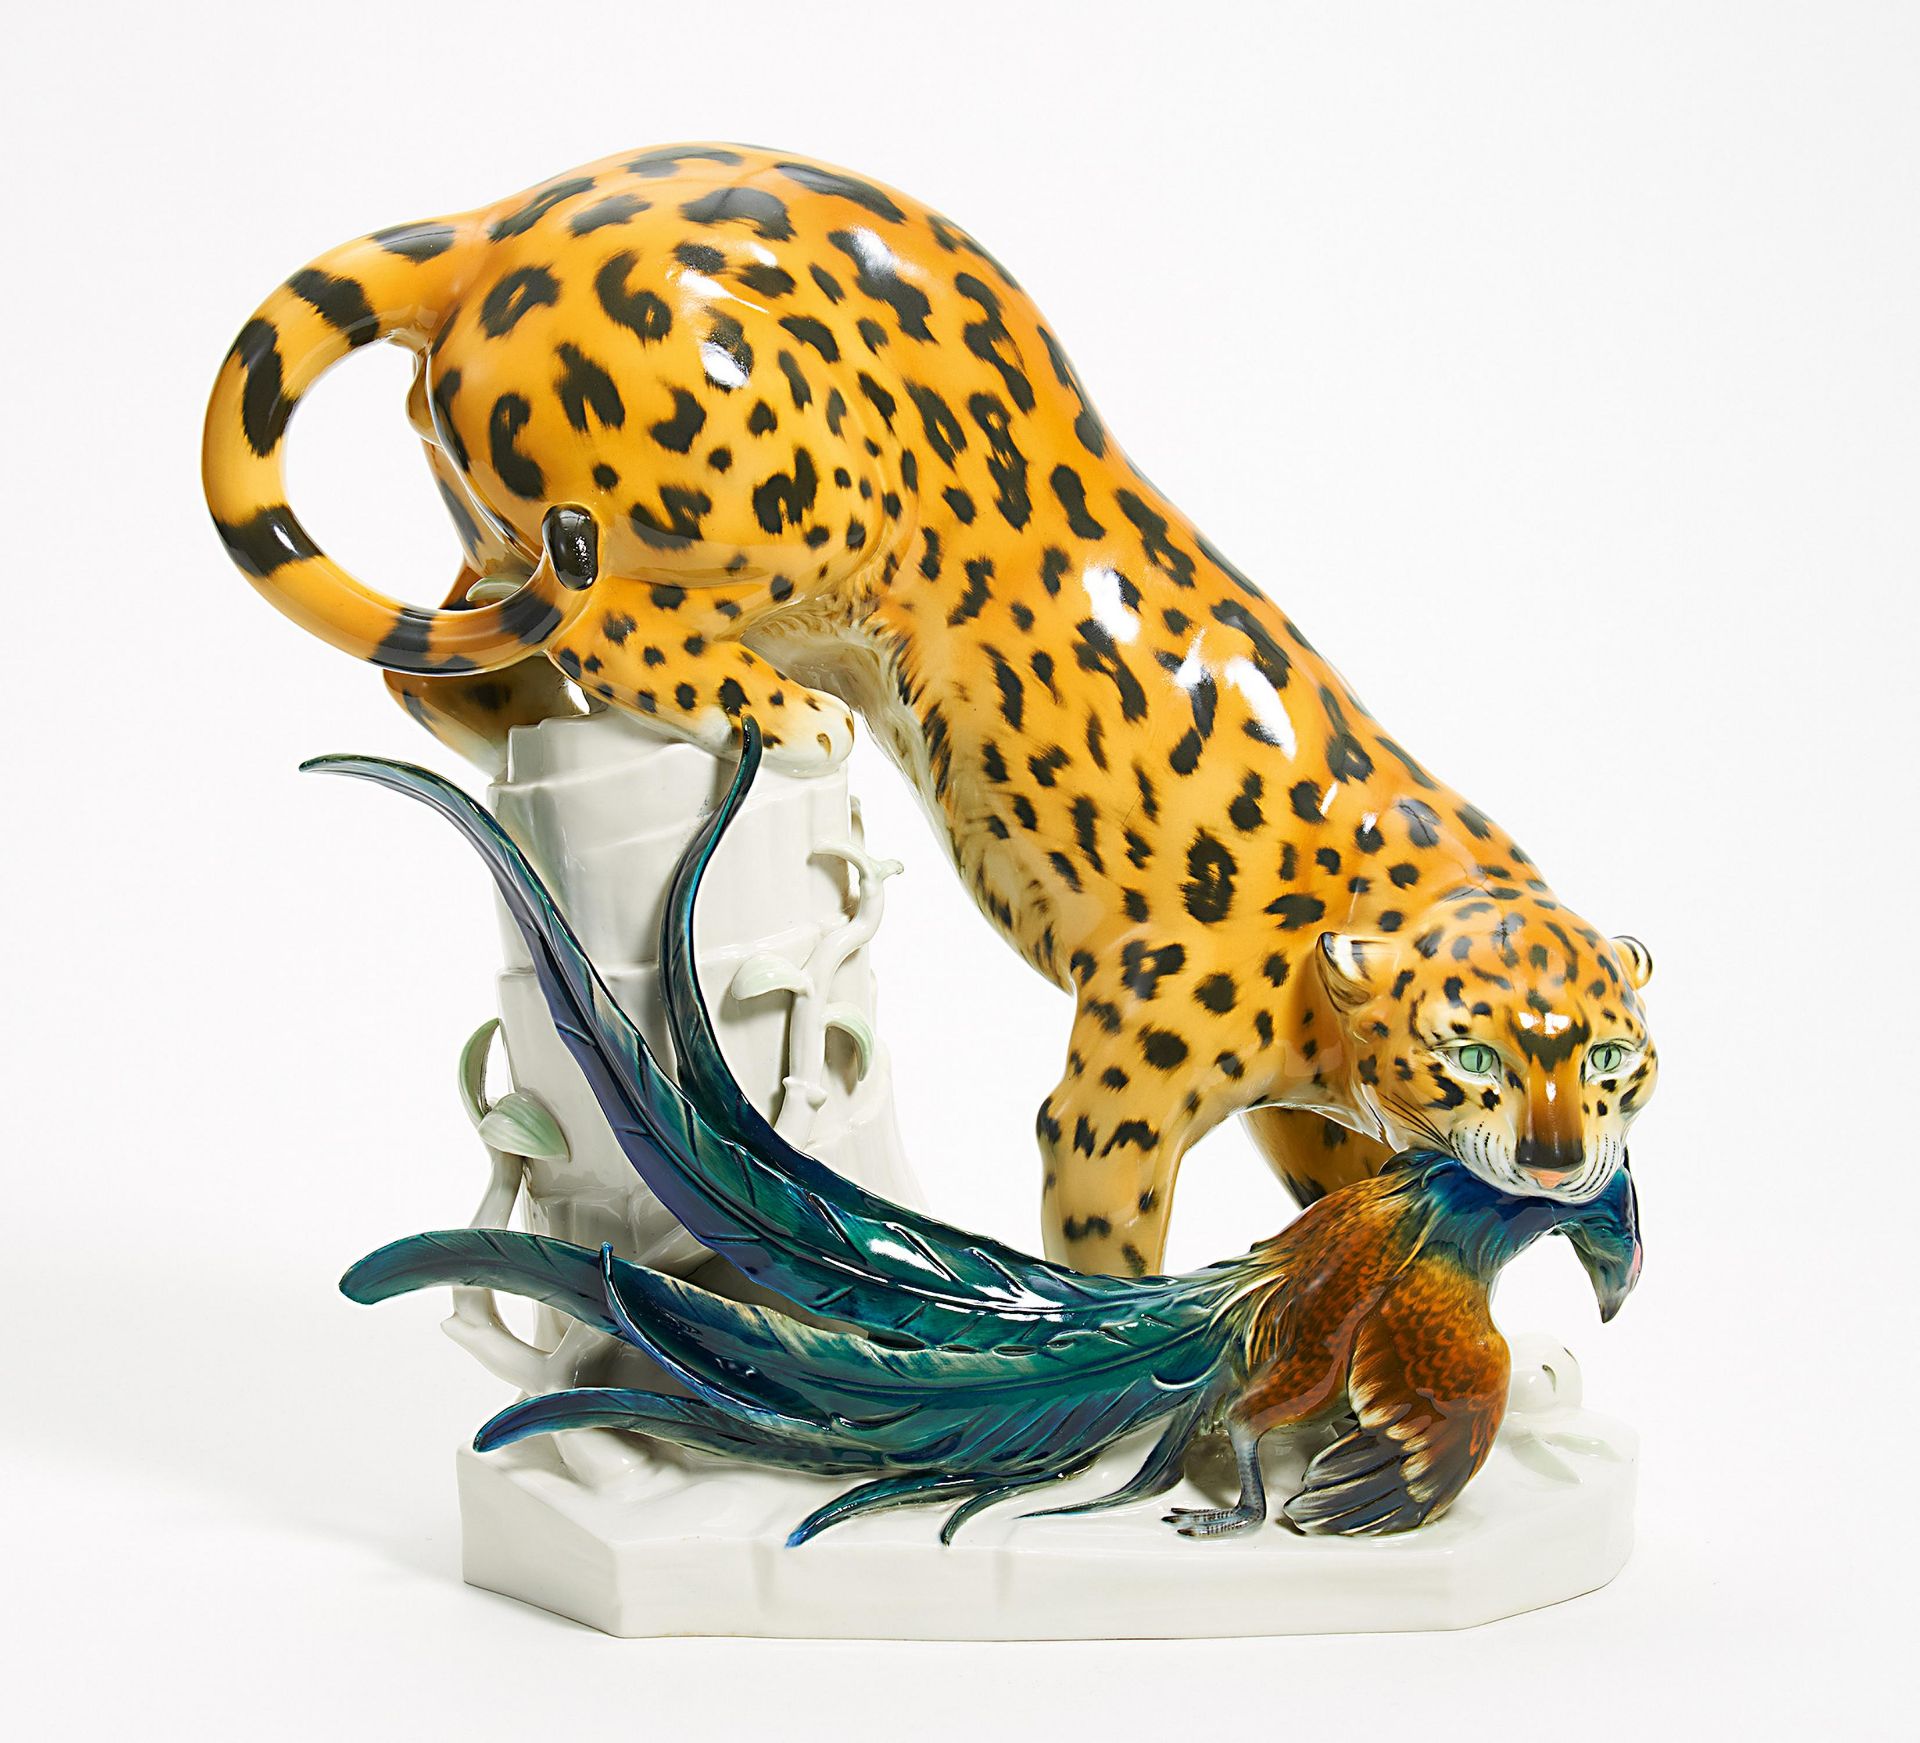 LARGE PORCELAIN FIGURE OF LEOPARD TAKING A PHEASANT. Volkstedt. After 1945. Model A. Storch, 1922.